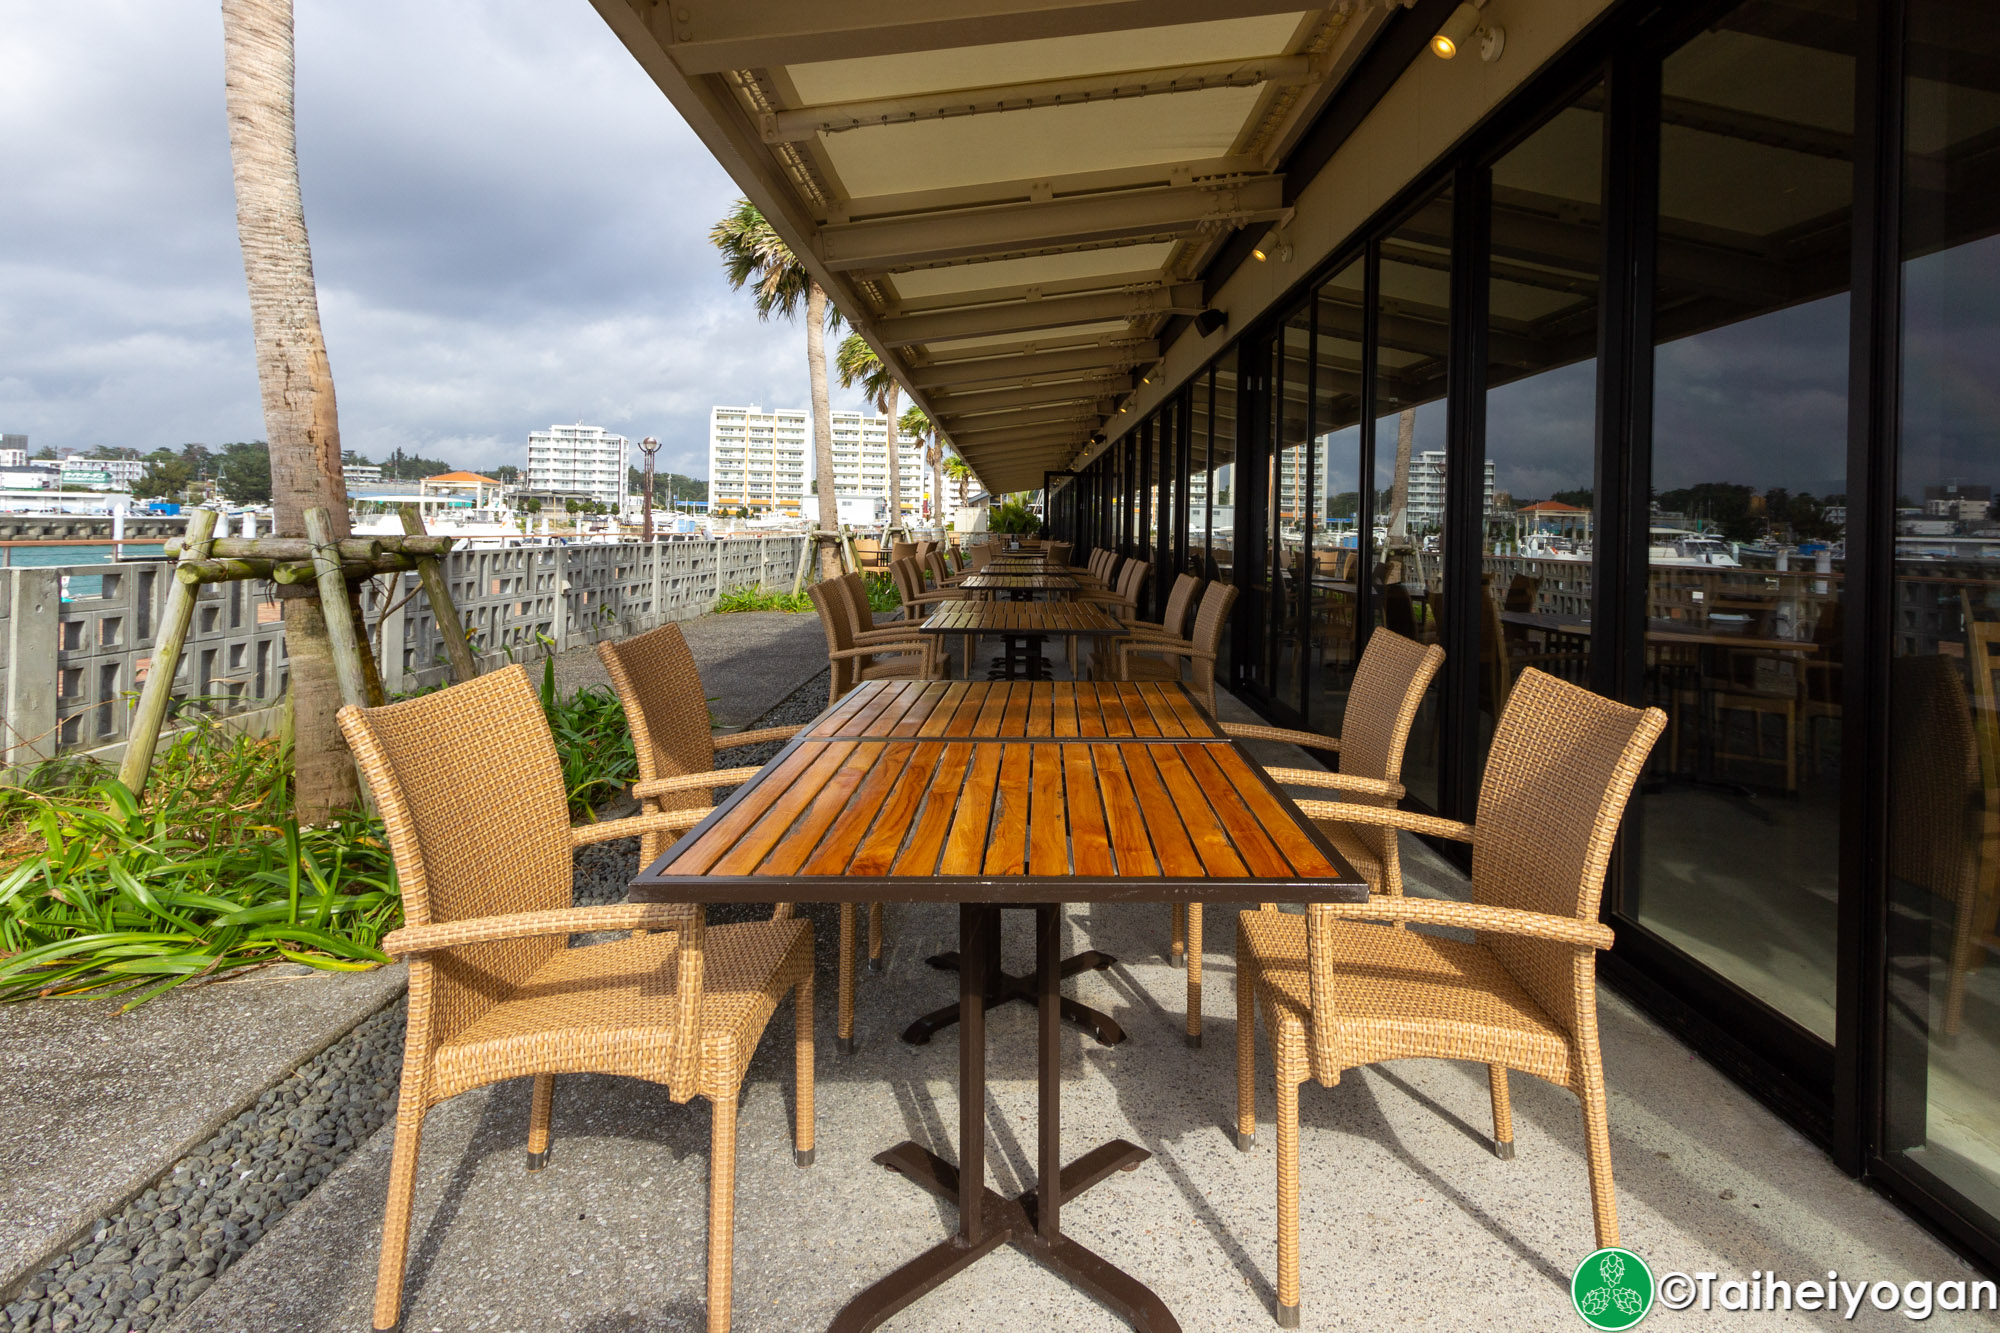 Chatan Harbor Brewery - Outdoor Terrace Seating